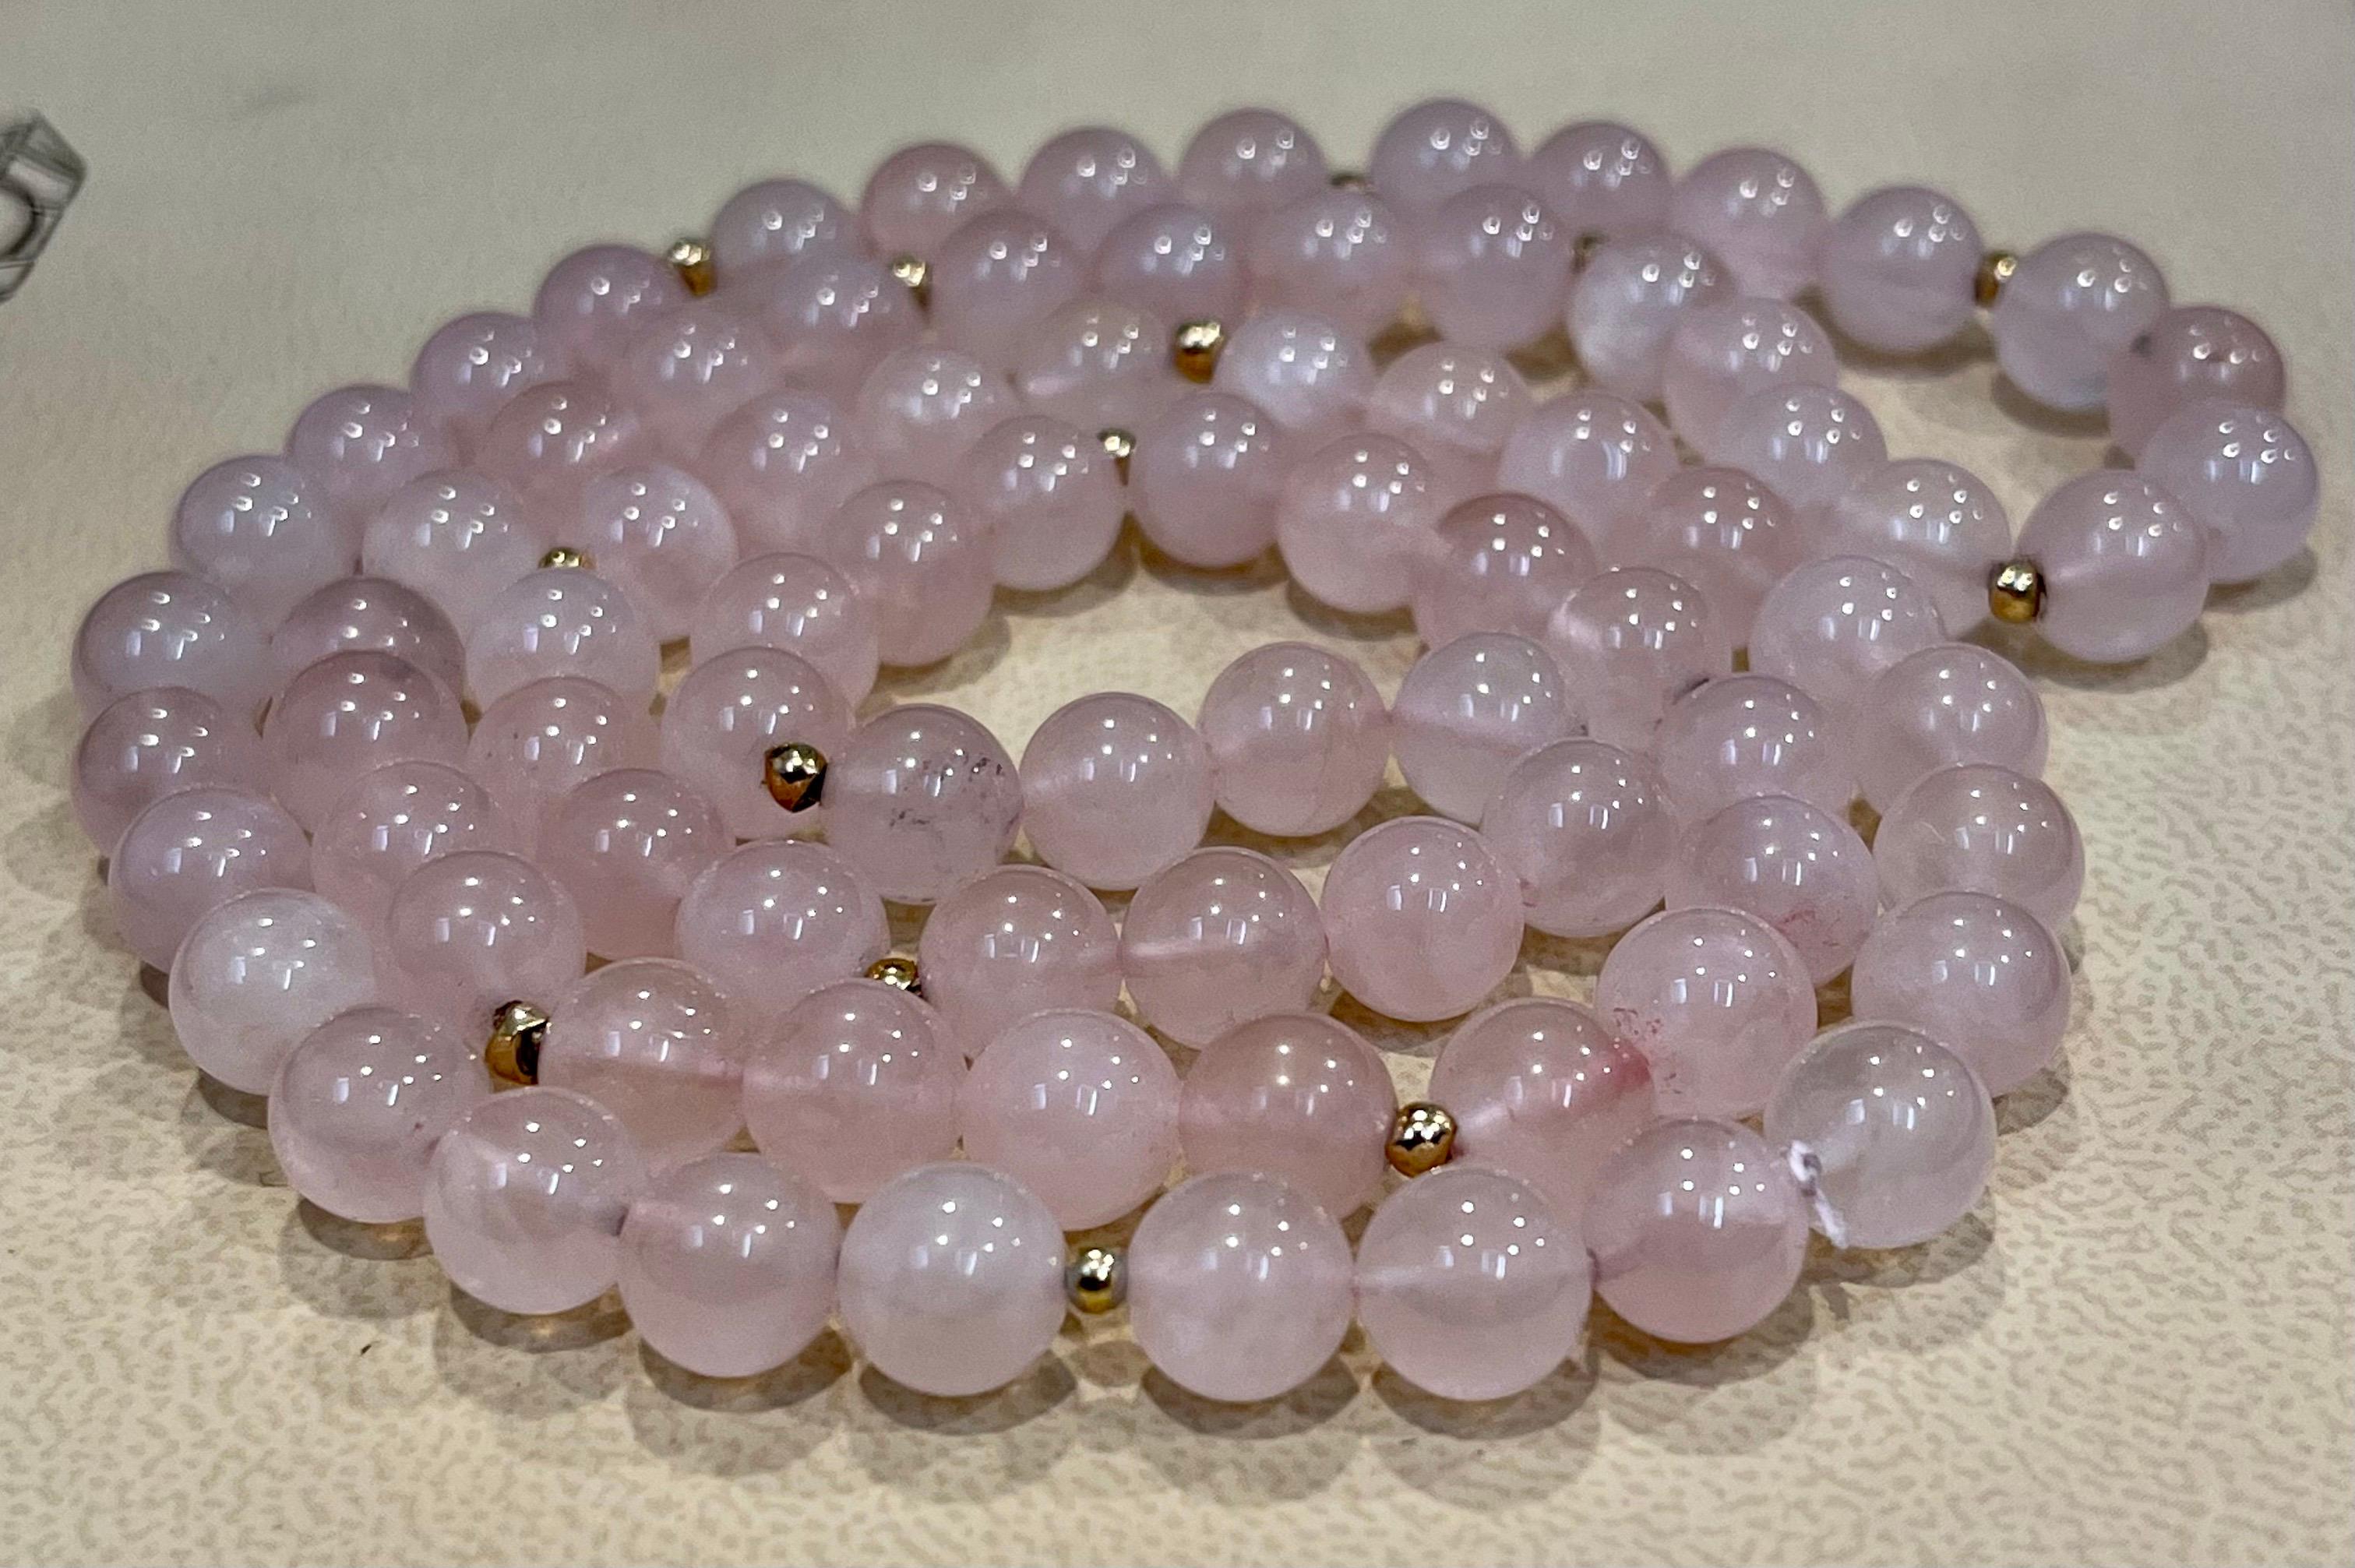 
Grade A++ Rose Quartz Crystal Bead Necklace 8.5 mm, Genuine Gemstone and has 14 Karat gold beads in between.
length 28 inches 
19 gold beads
no Clasp
Weight of the necklace is 68 grams
I guaranteed you will be very happy .
Super fashionable and